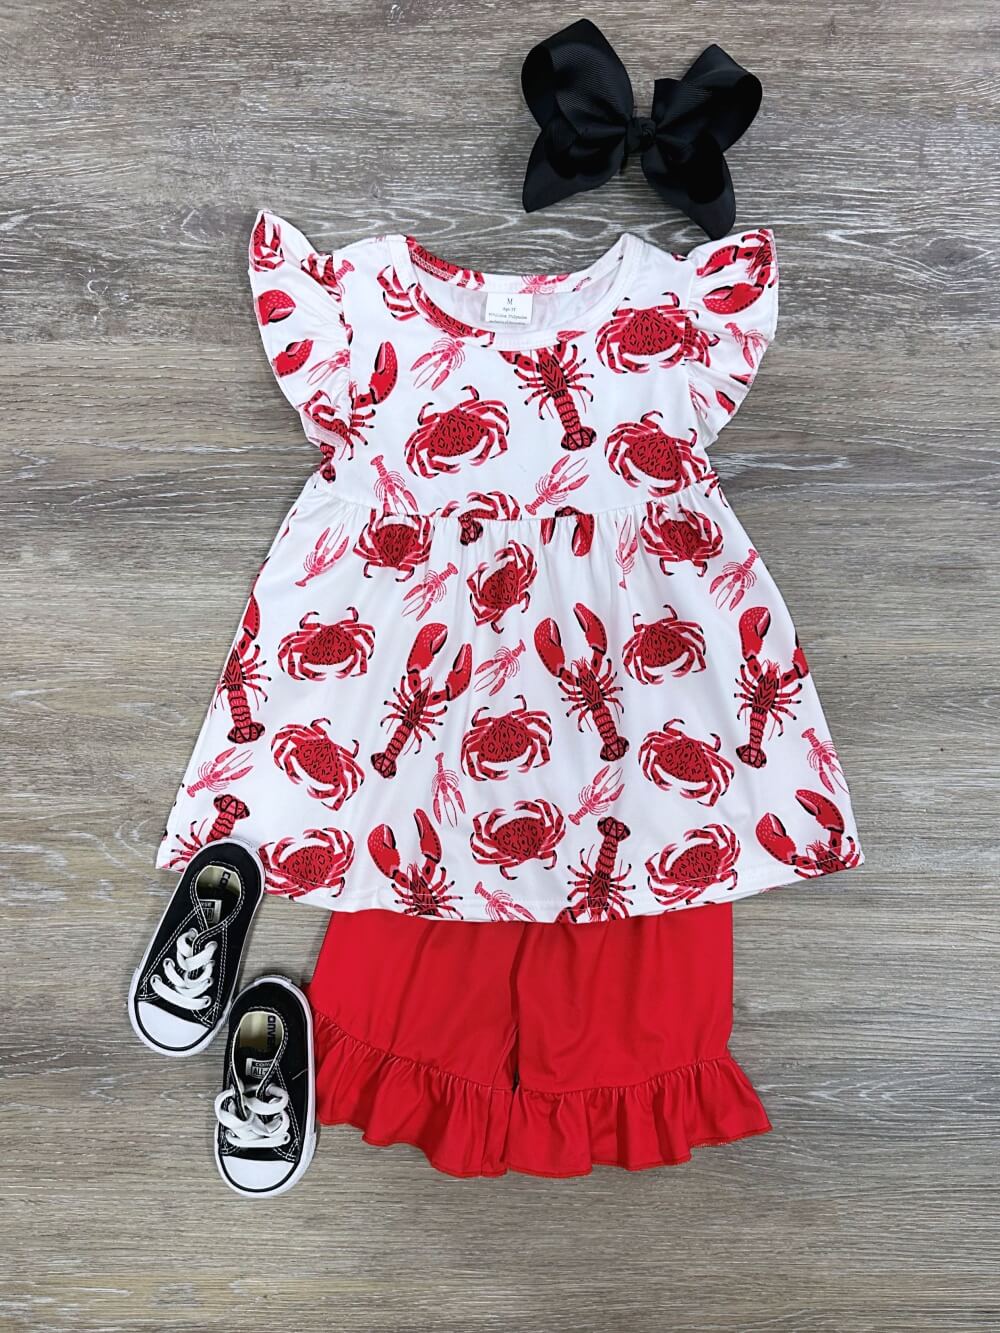 Bell of the Boil Red Lobster & Crab Girls Shorts Outfit - Sydney So Sweet